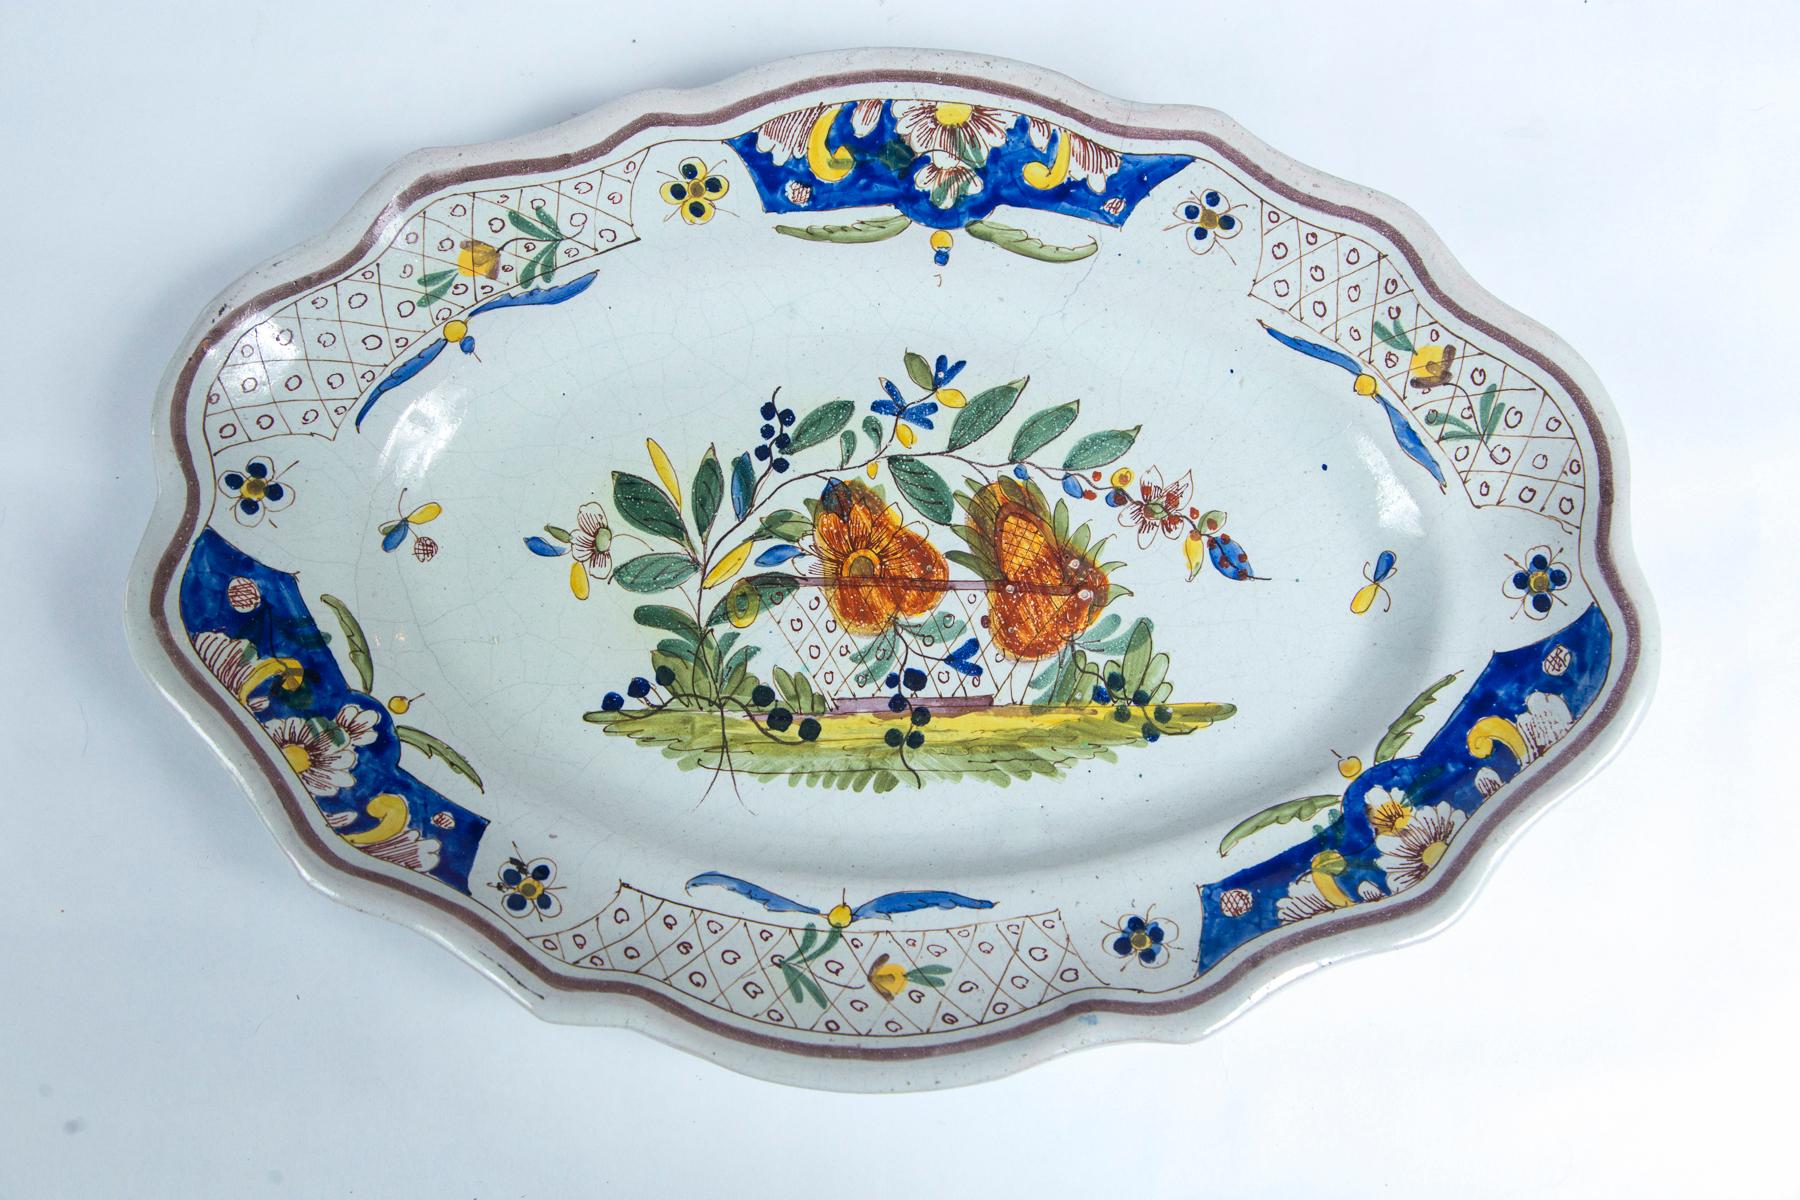 Hand painted French faience platter, early 19th century. Scalloped, oval shape. Center floral and border designs in traditional coloration.